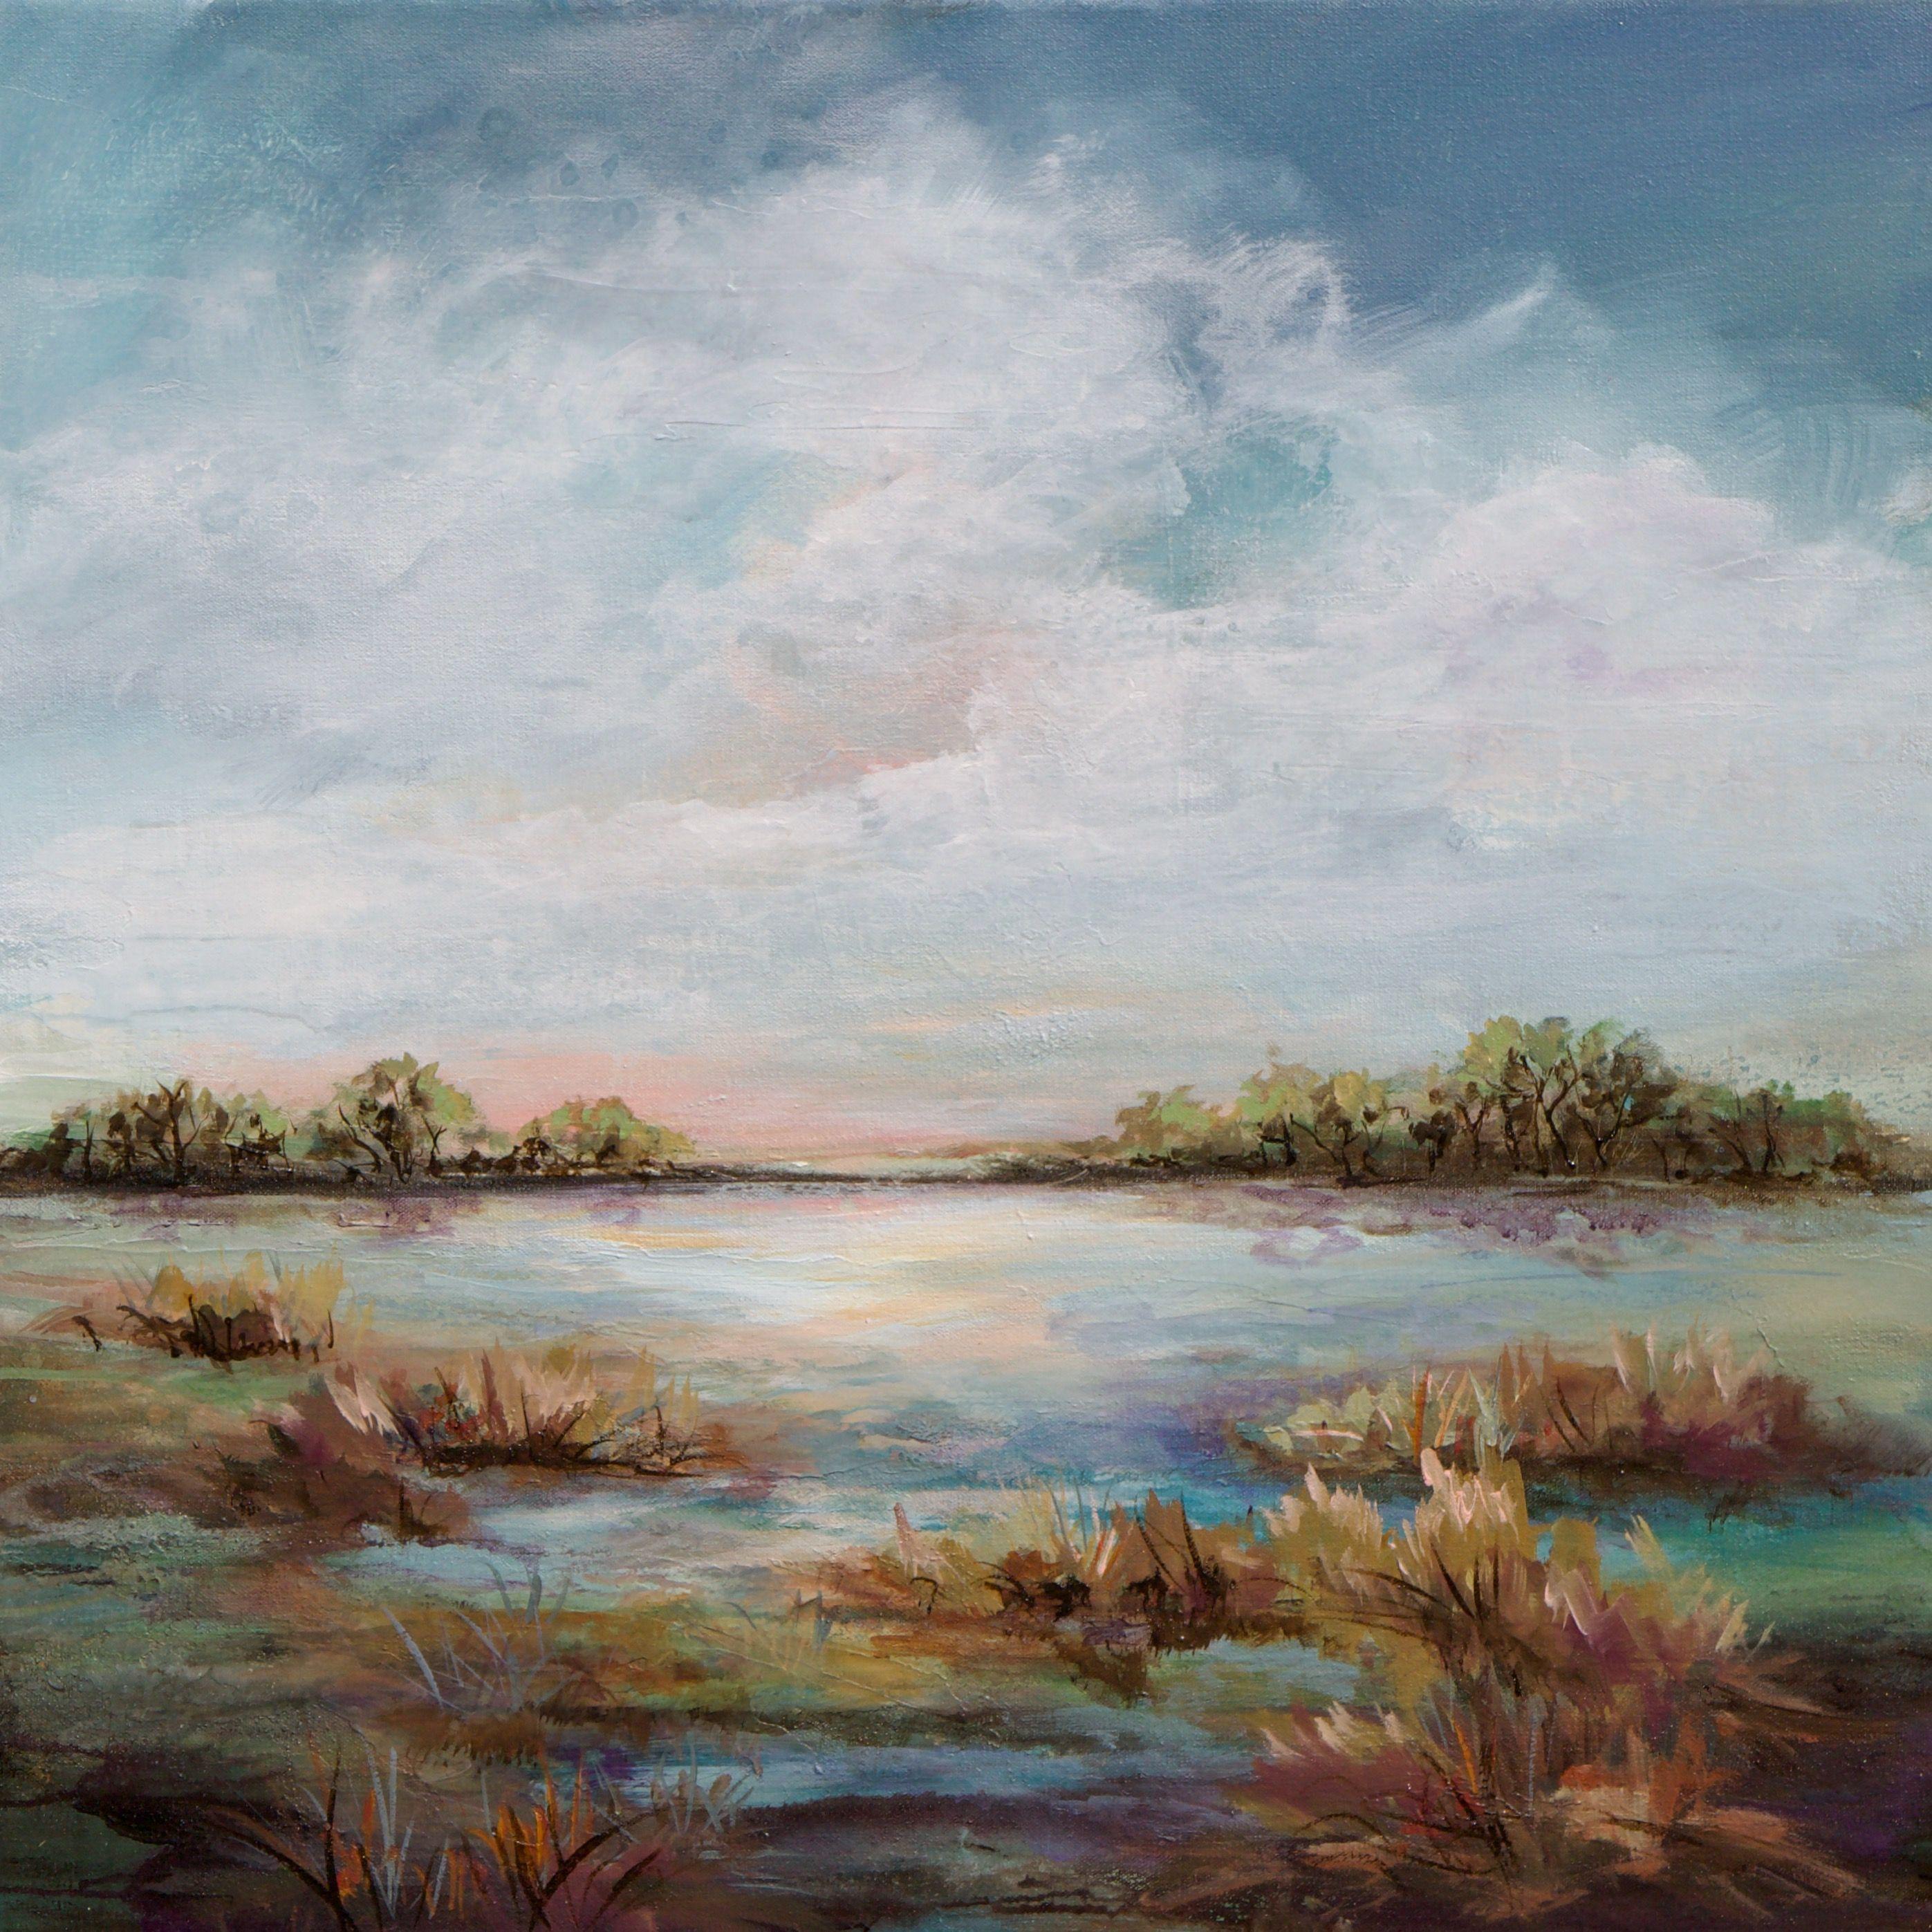 This original marshland scene landscape is presented on a gallery wrapped canvas. There are 15+ layers of acrylic paint and washes that give the piece nuance, depth, and interest. The side edges are painted black and it is wired ready to hang.  Each